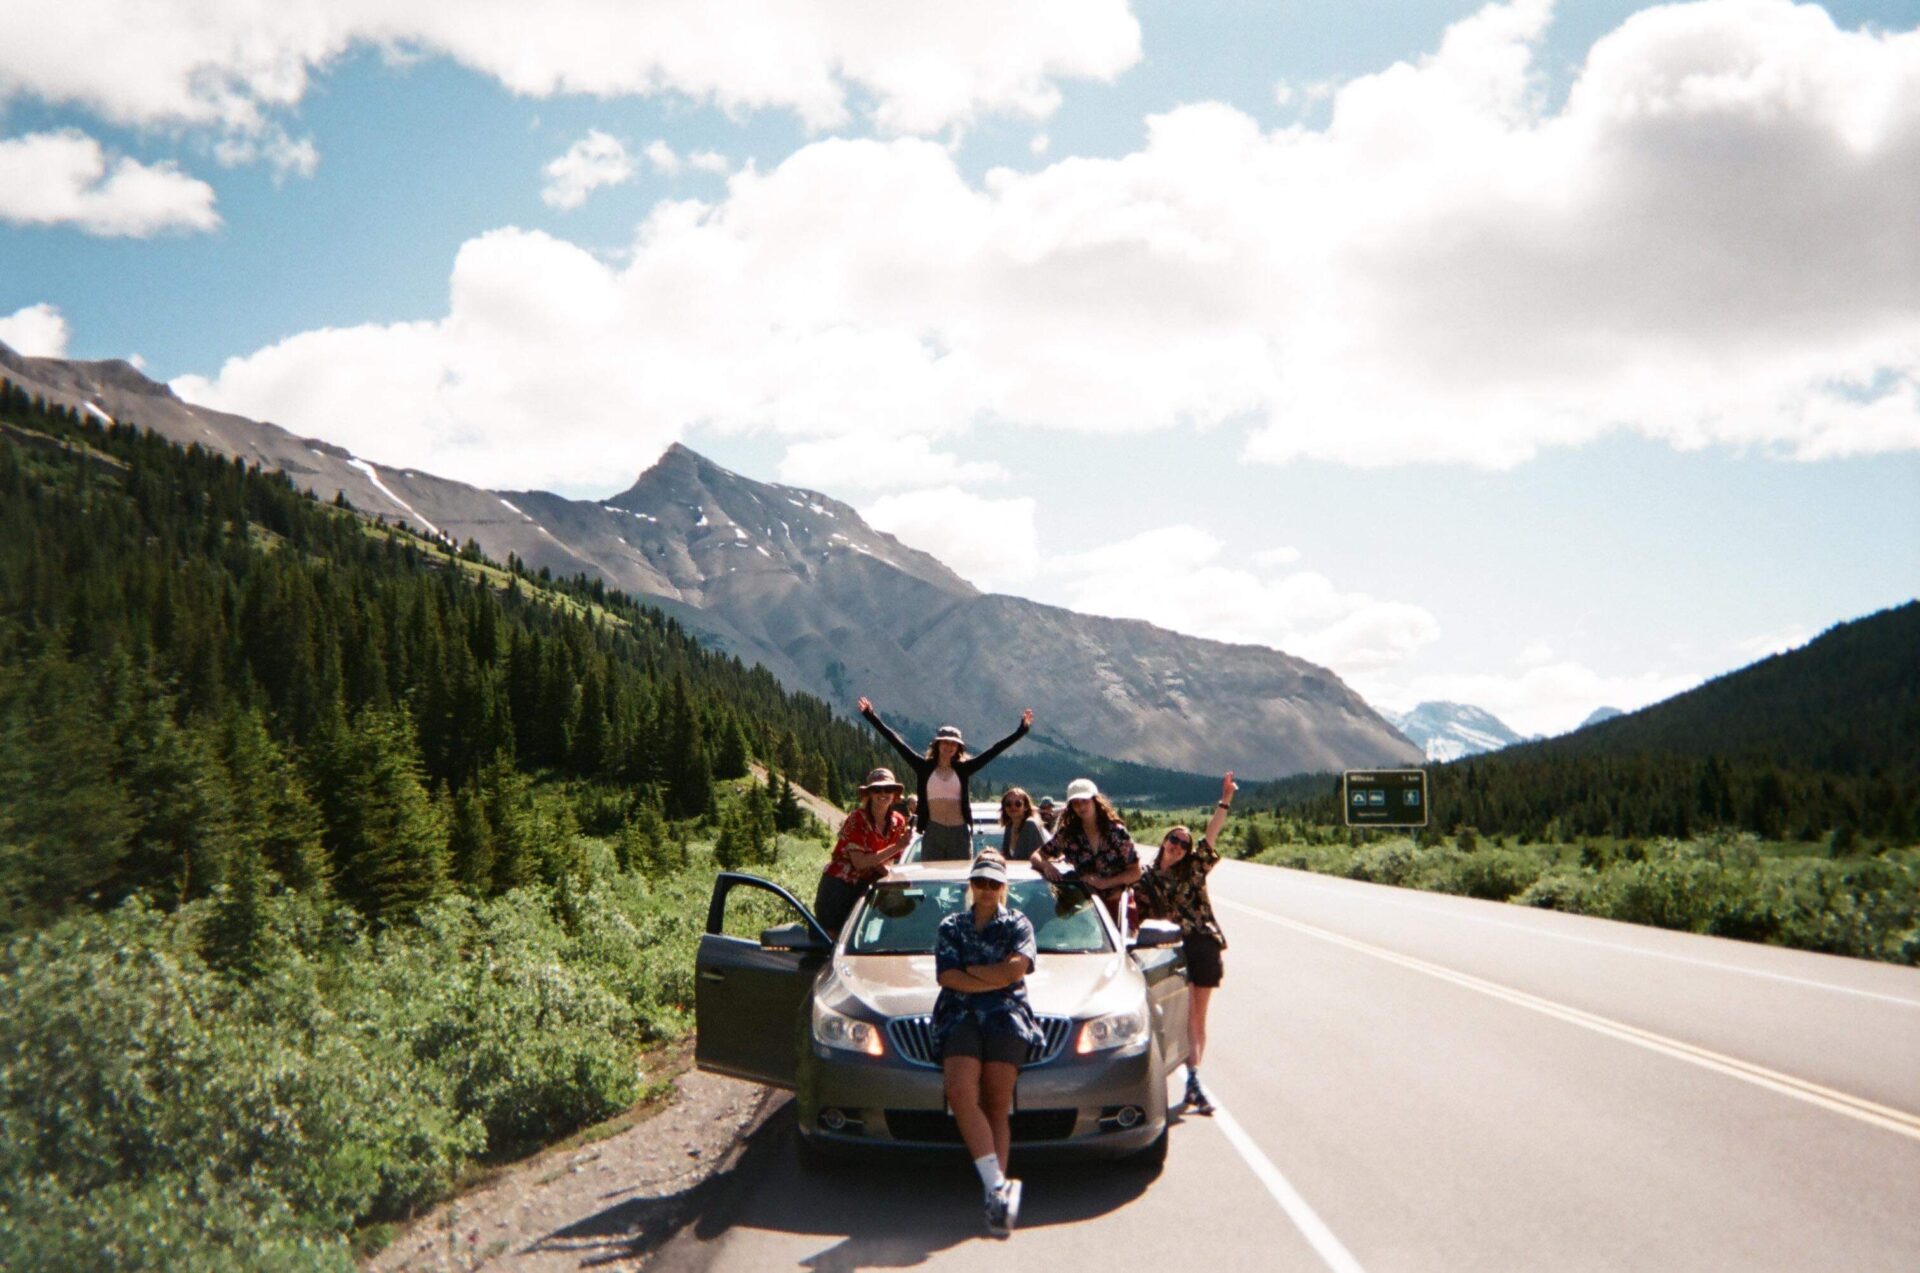 Things to do along the Icefields Parkway